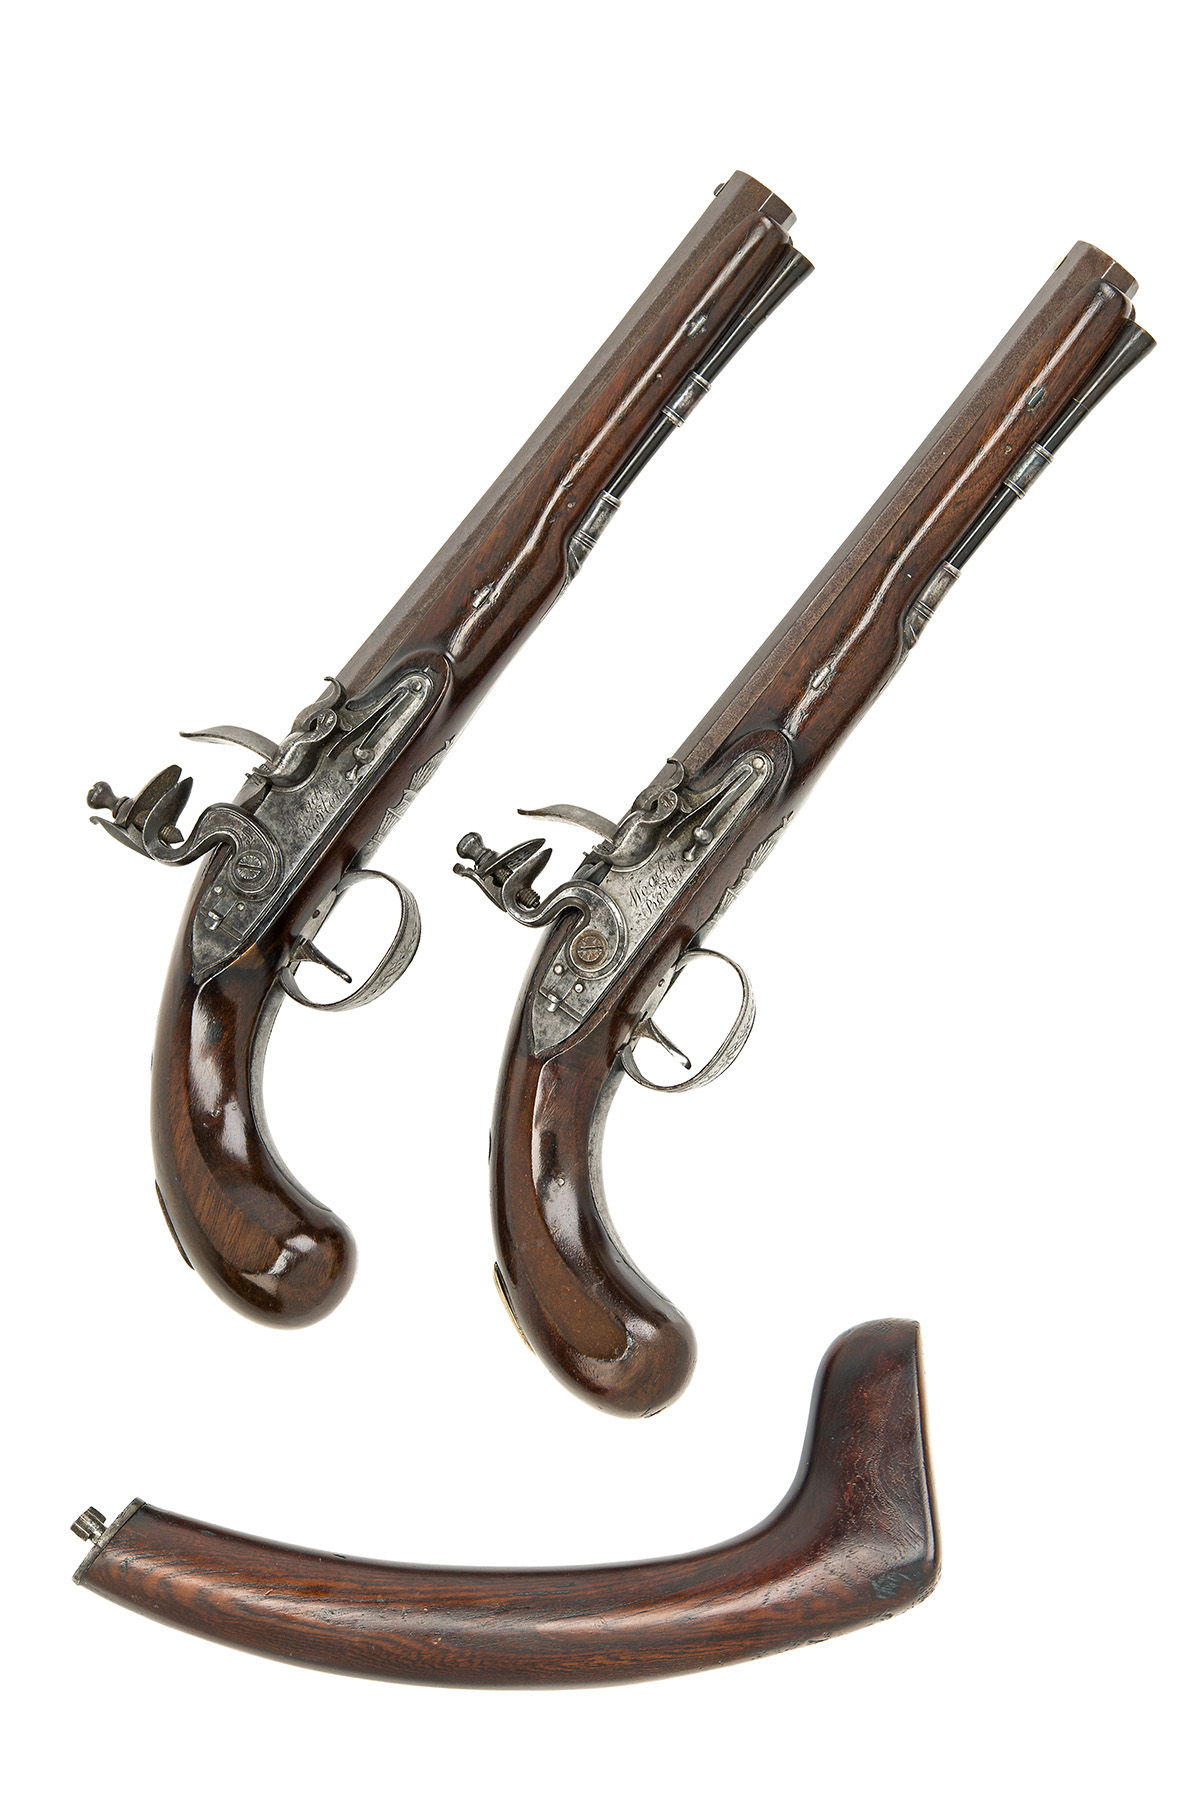 WOGDON & BARTON, LONDON A CASED PAIR OF 28-BORE FLINTLOCK OFFICER'S PISTOLS OF DUELLING STYLE WITH A